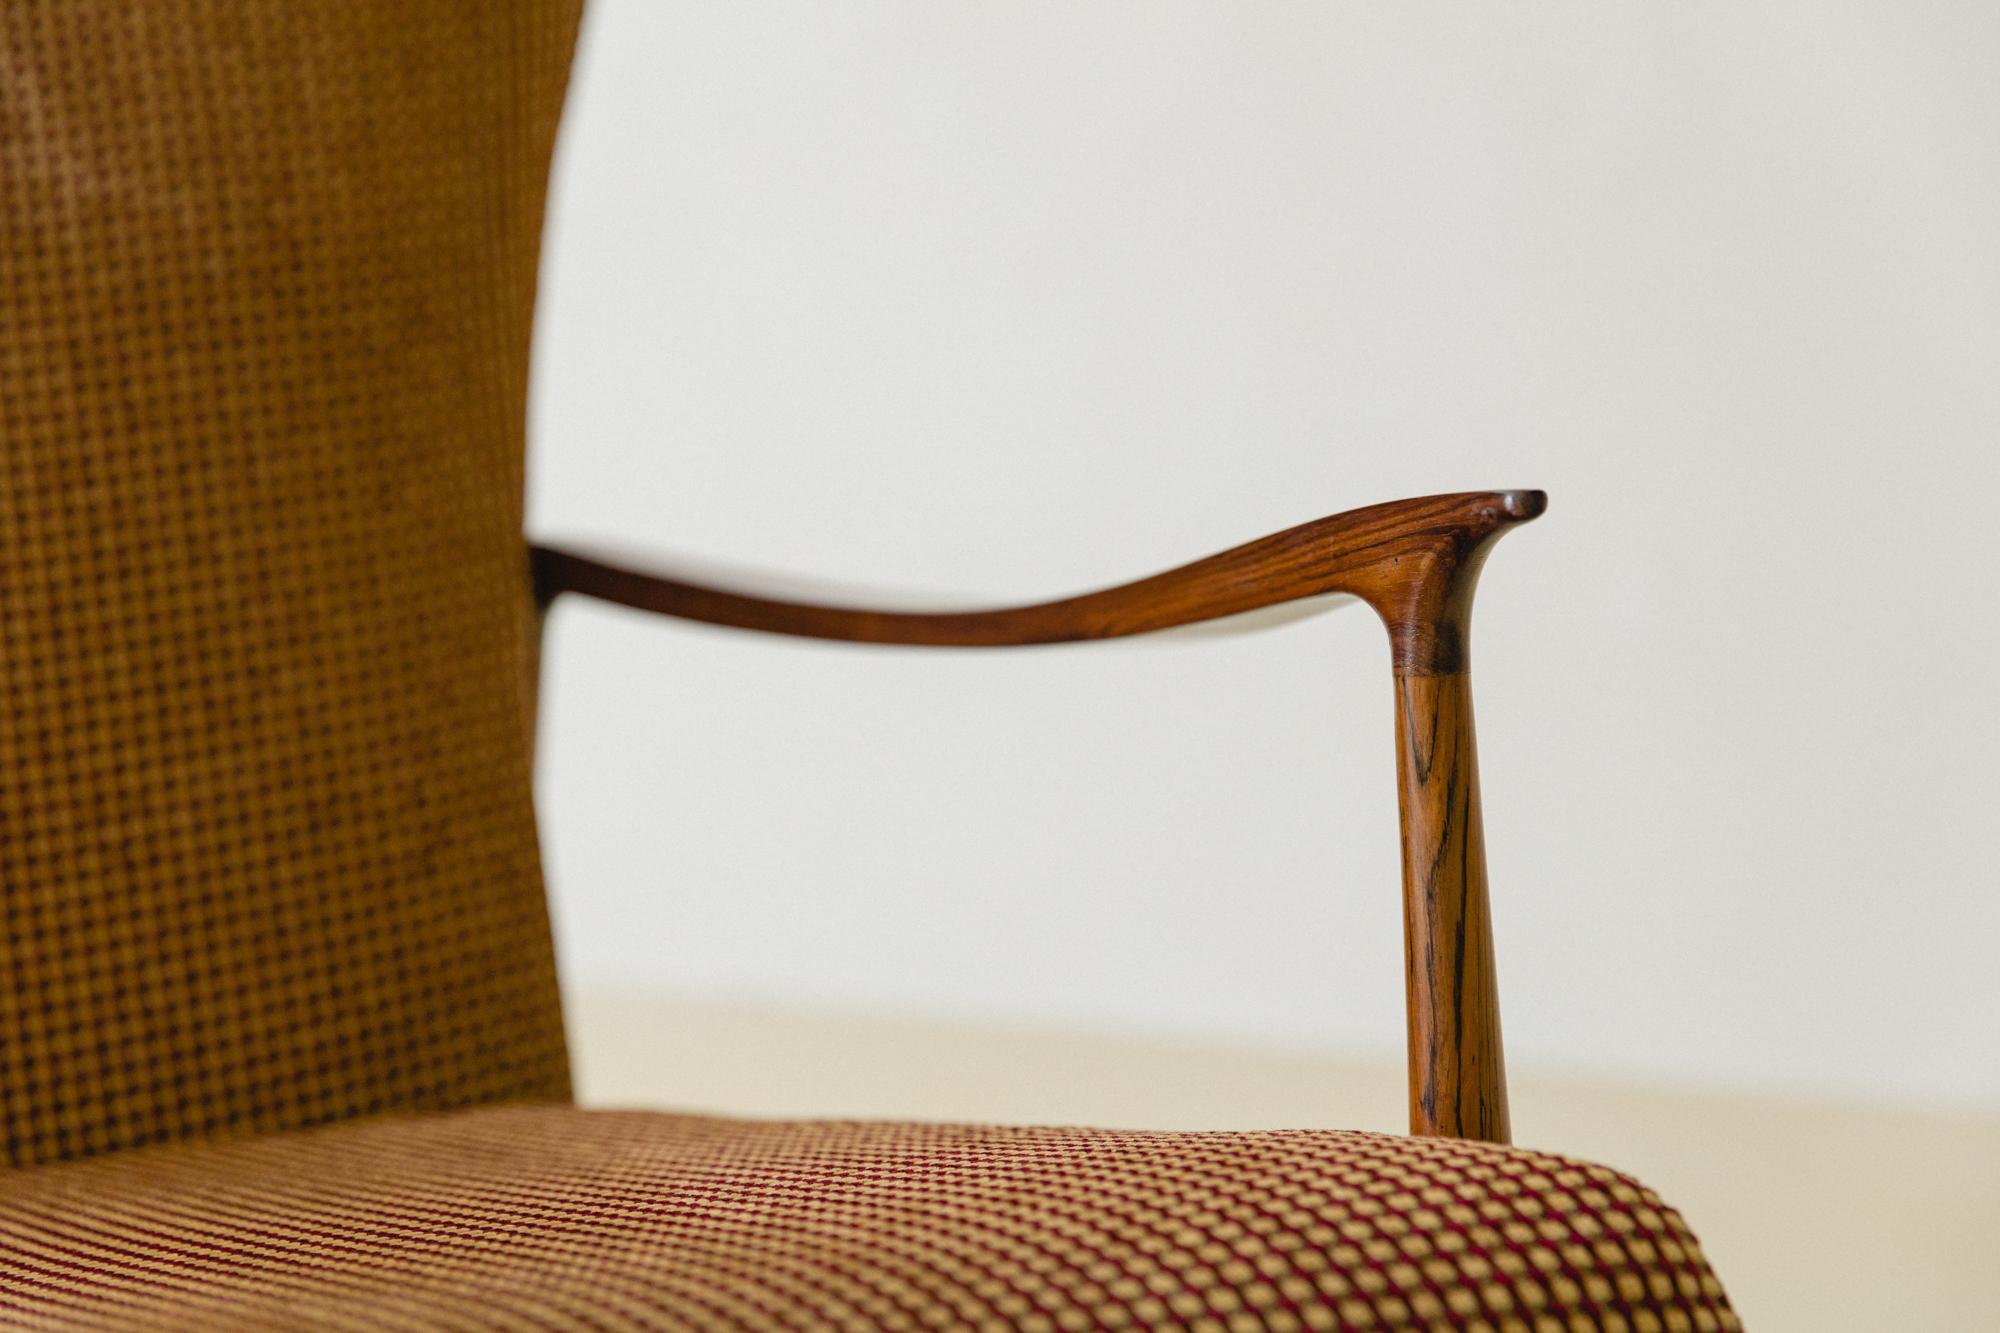 This rosewood armchair was produced in the 1950s by the Brazilian company Móveis Cimo, a Pioneer in Brazilian furniture industrialization. 

Cimo's history starts in 1921 with a wood boxes factory called A.Ehrl e Cia. and ends in 1982 as a